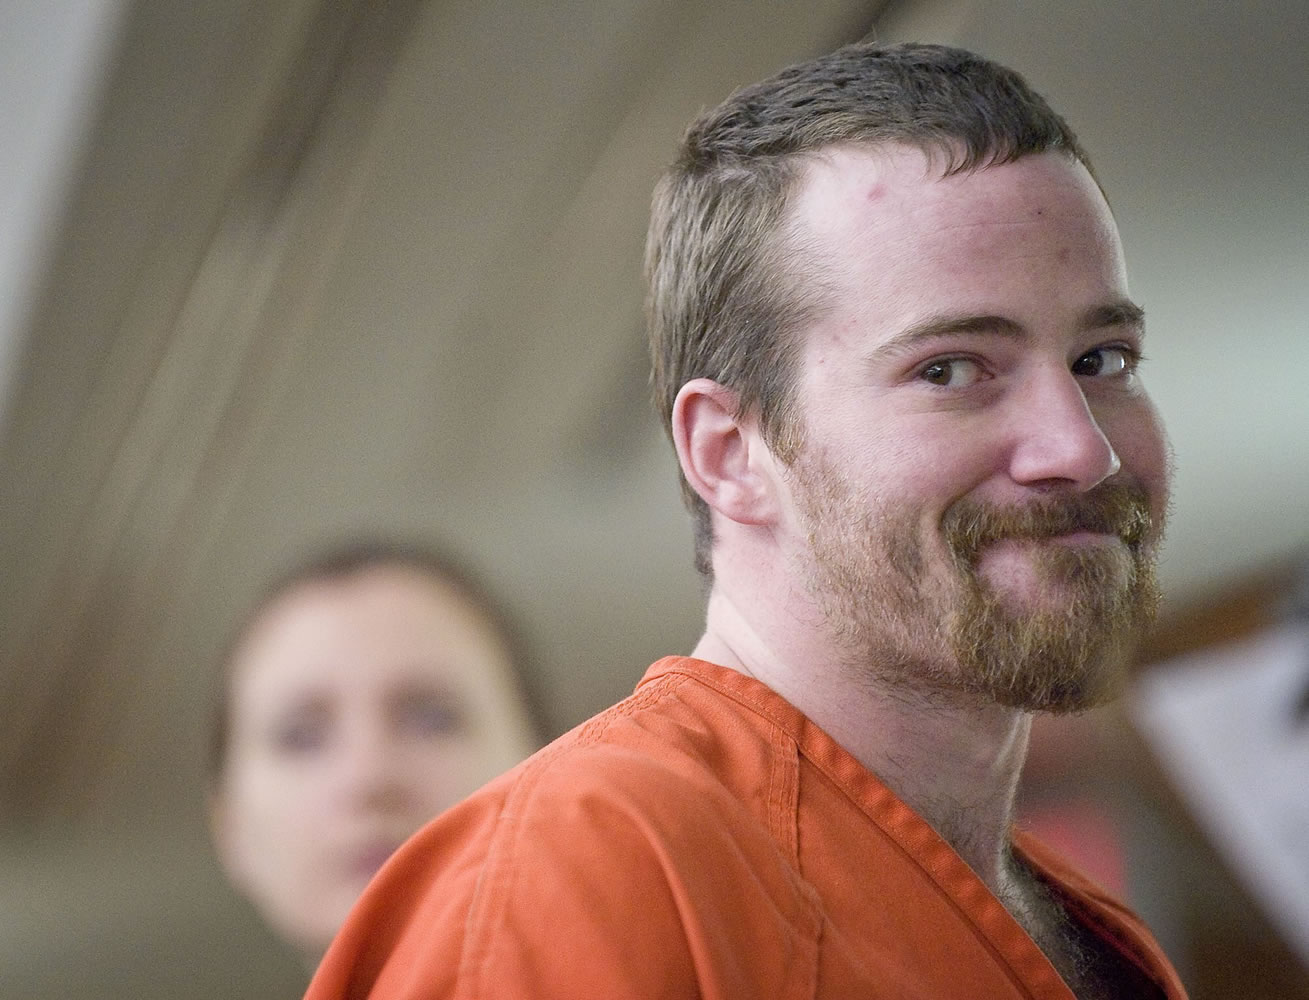 Mathew Michaelson, 28, pictured here at a court hearing in December, was sentenced Friday to seven years in prison in connection to an alleged hatchet attack.